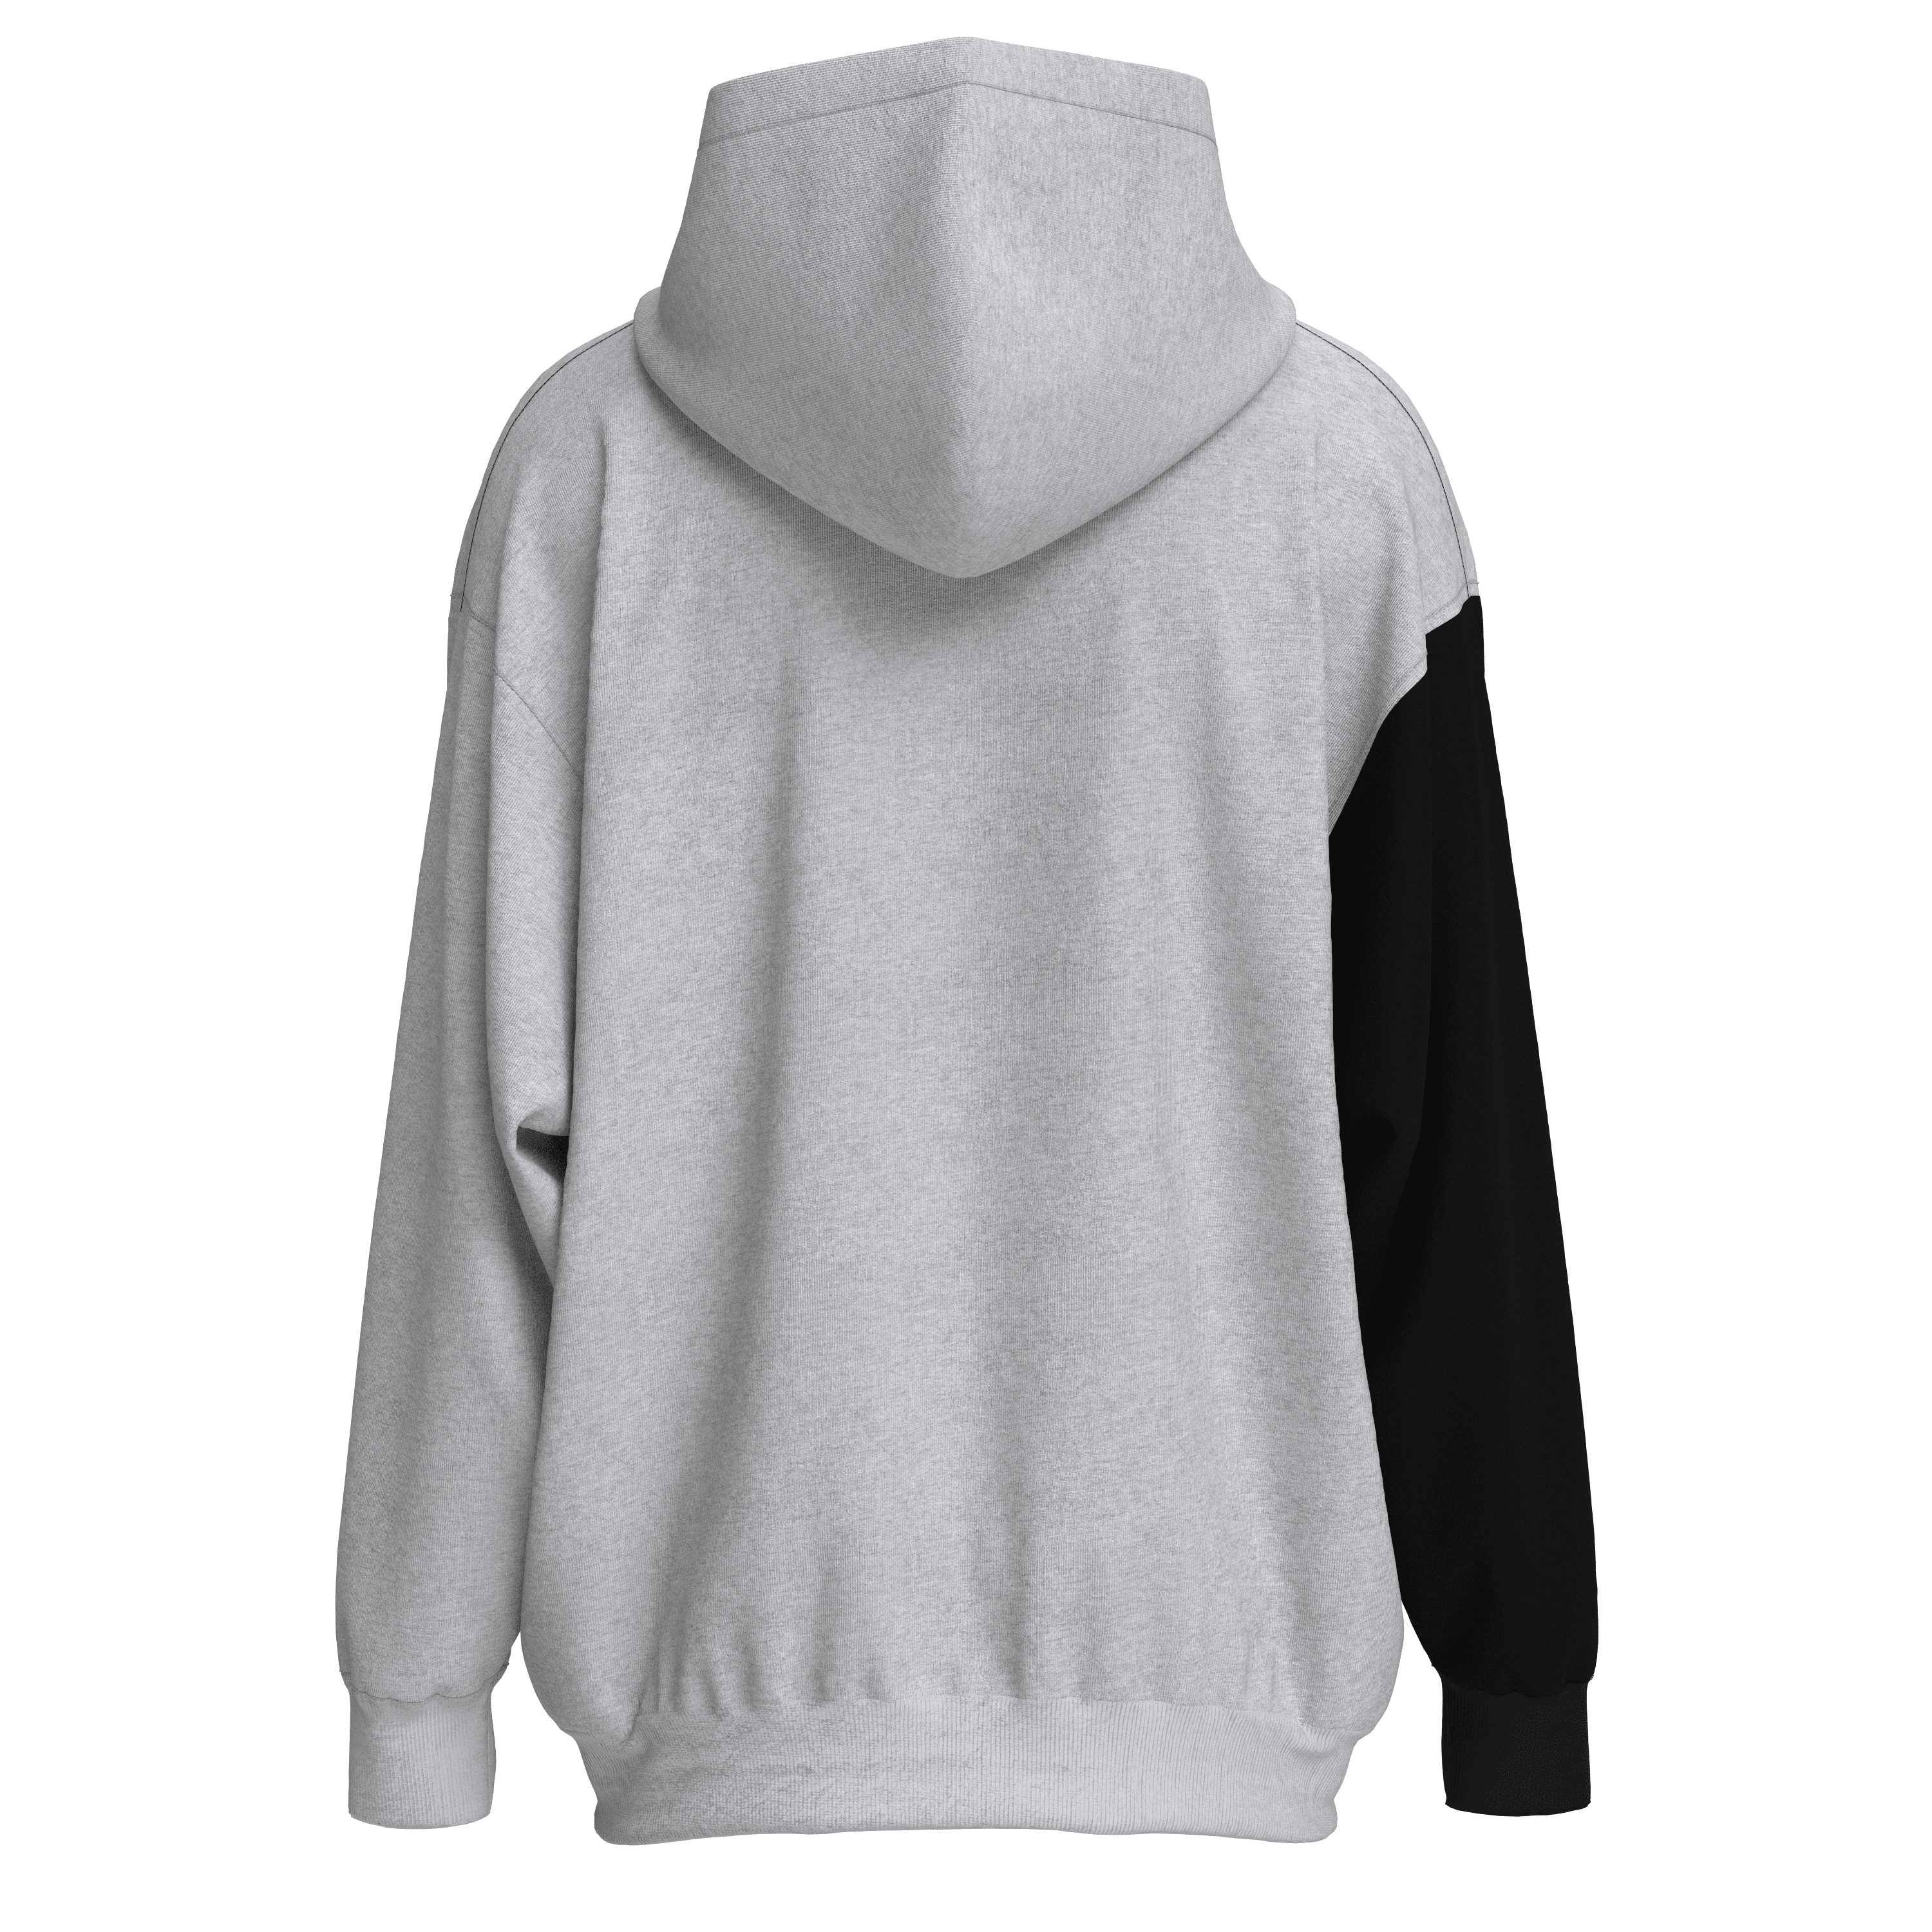 Oversize Shout Limited Edition Gray And Black Oldschool Unisex Zip Up Hoodie